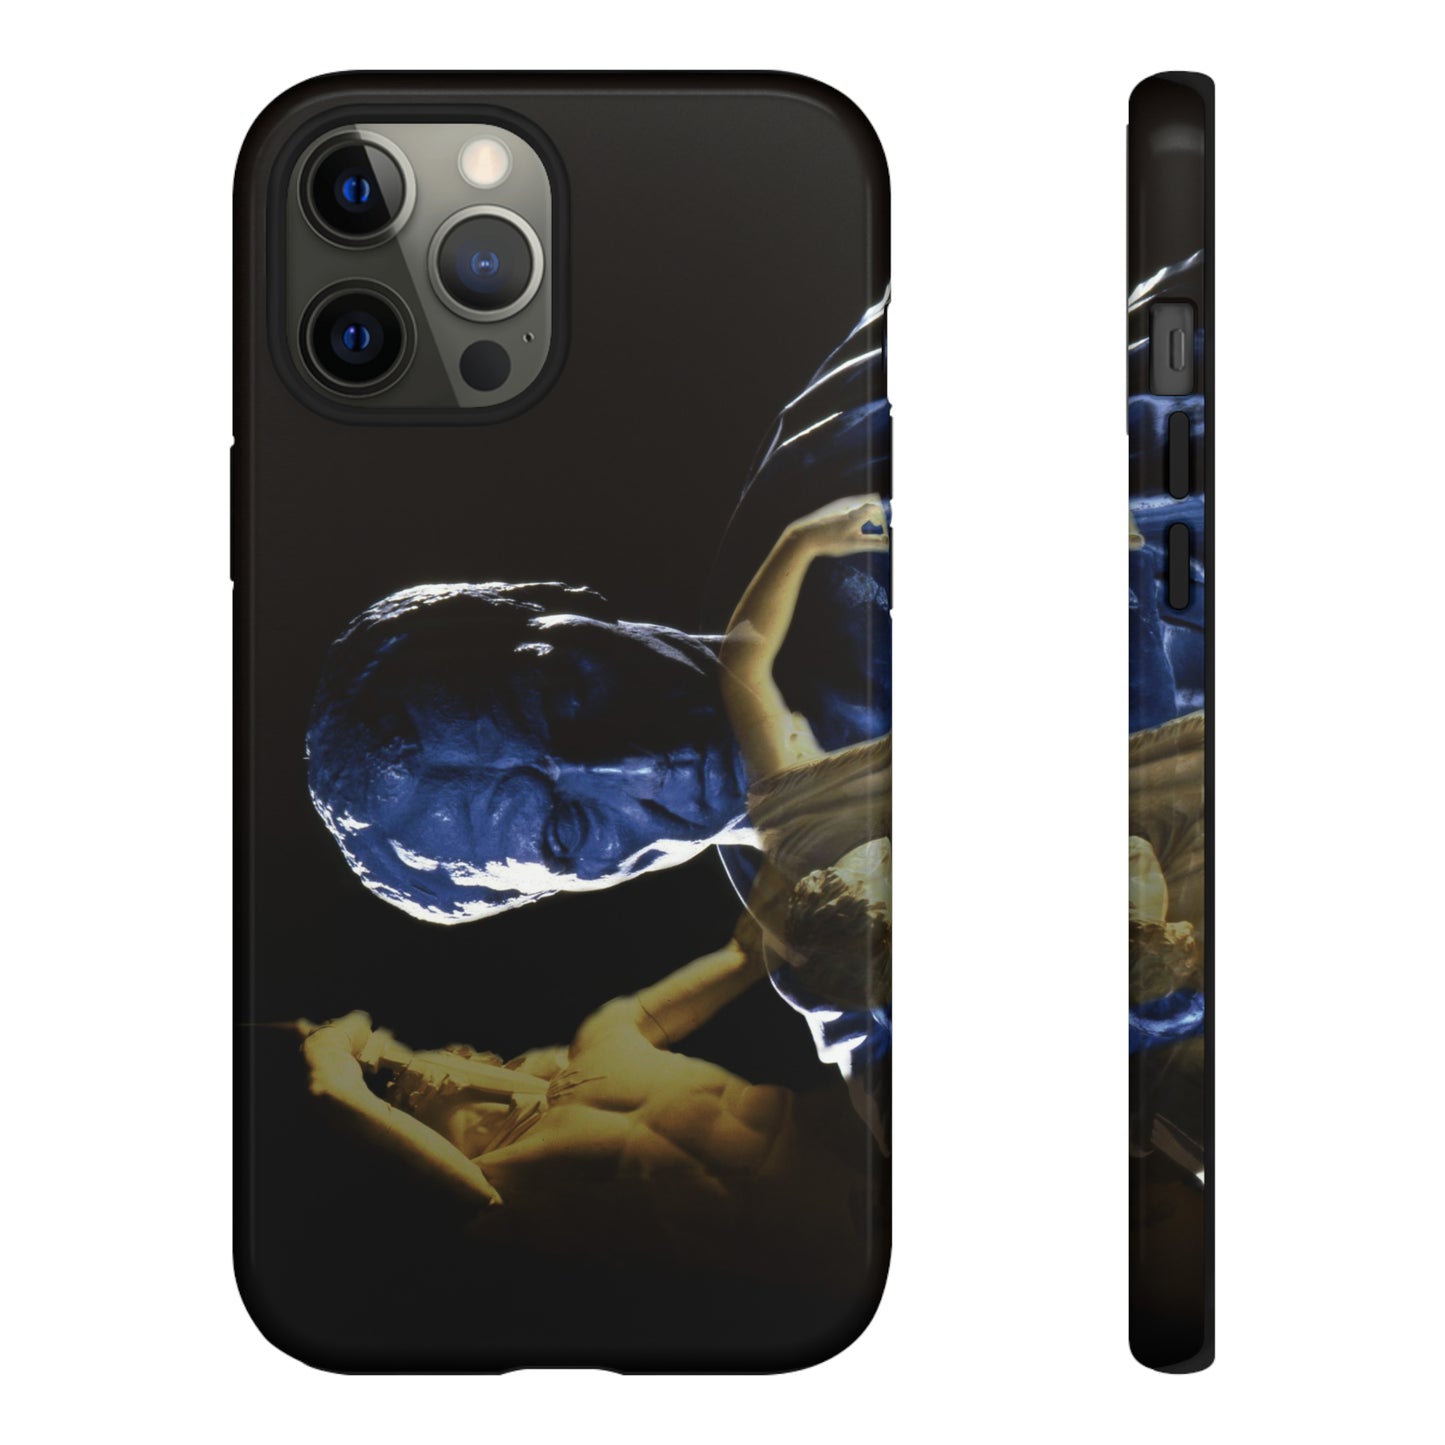 Julius Caesar and the dying Galata Phone Cases